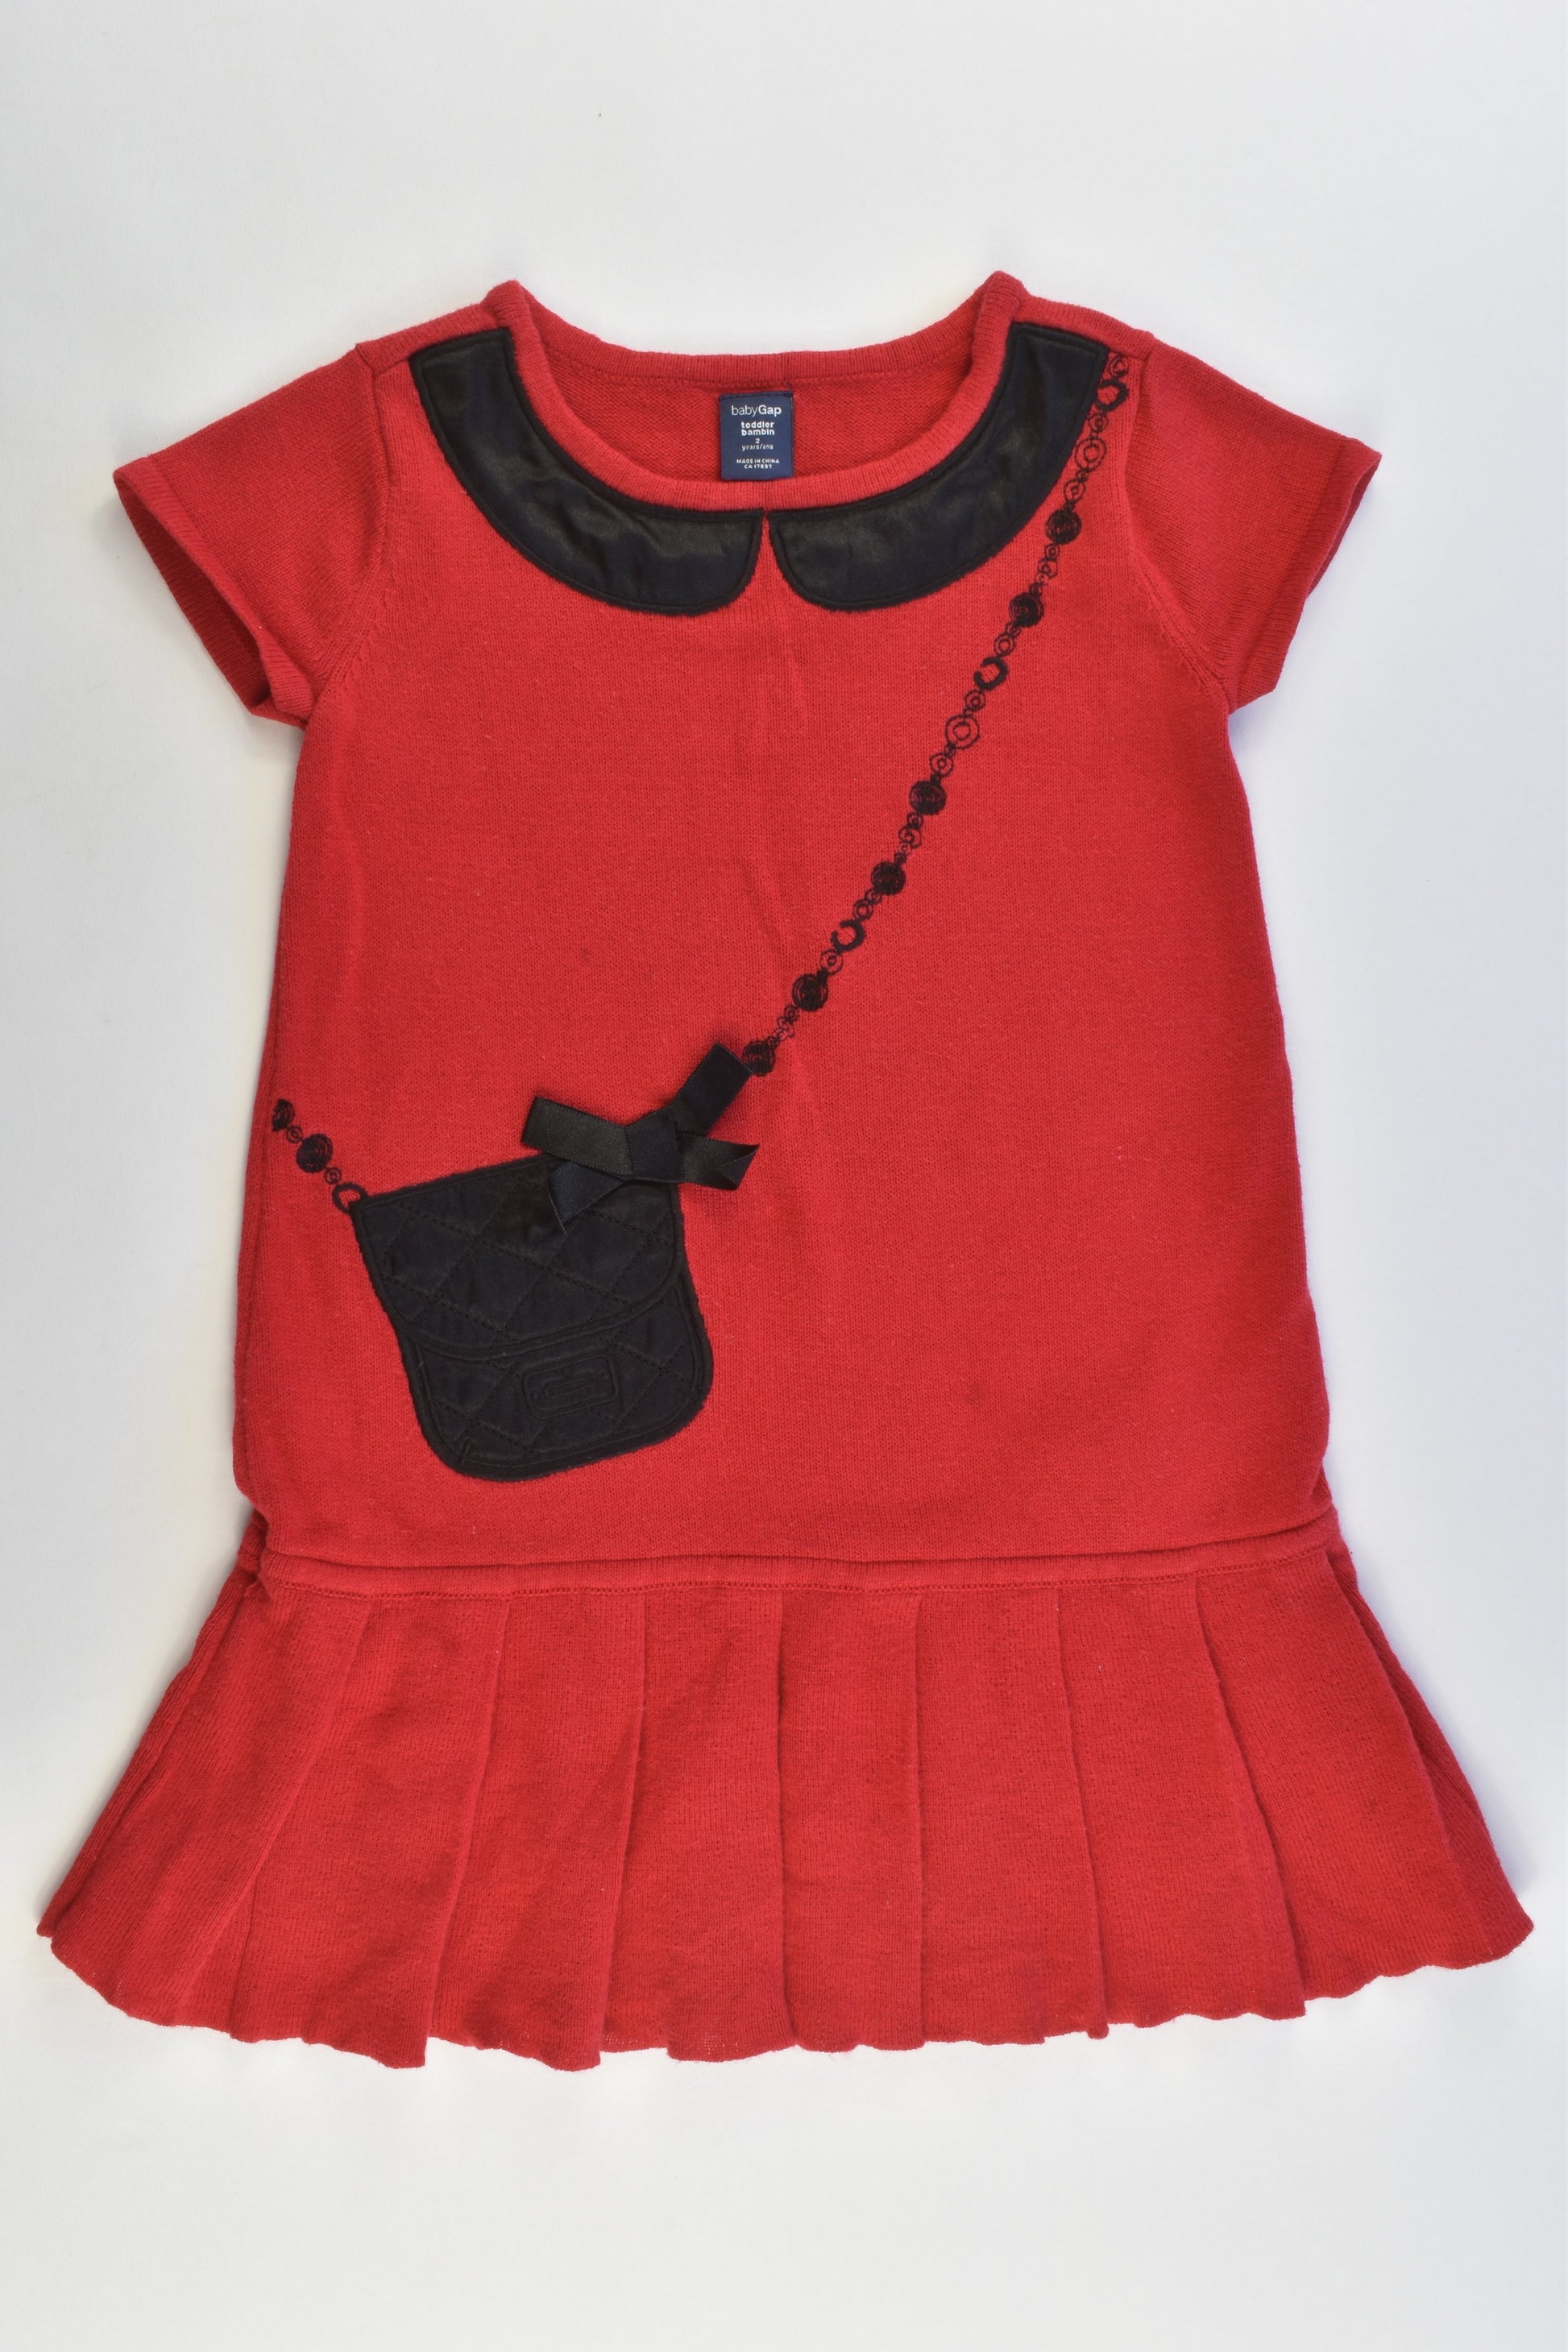 Baby Gap Size 2 years Knitted Dress